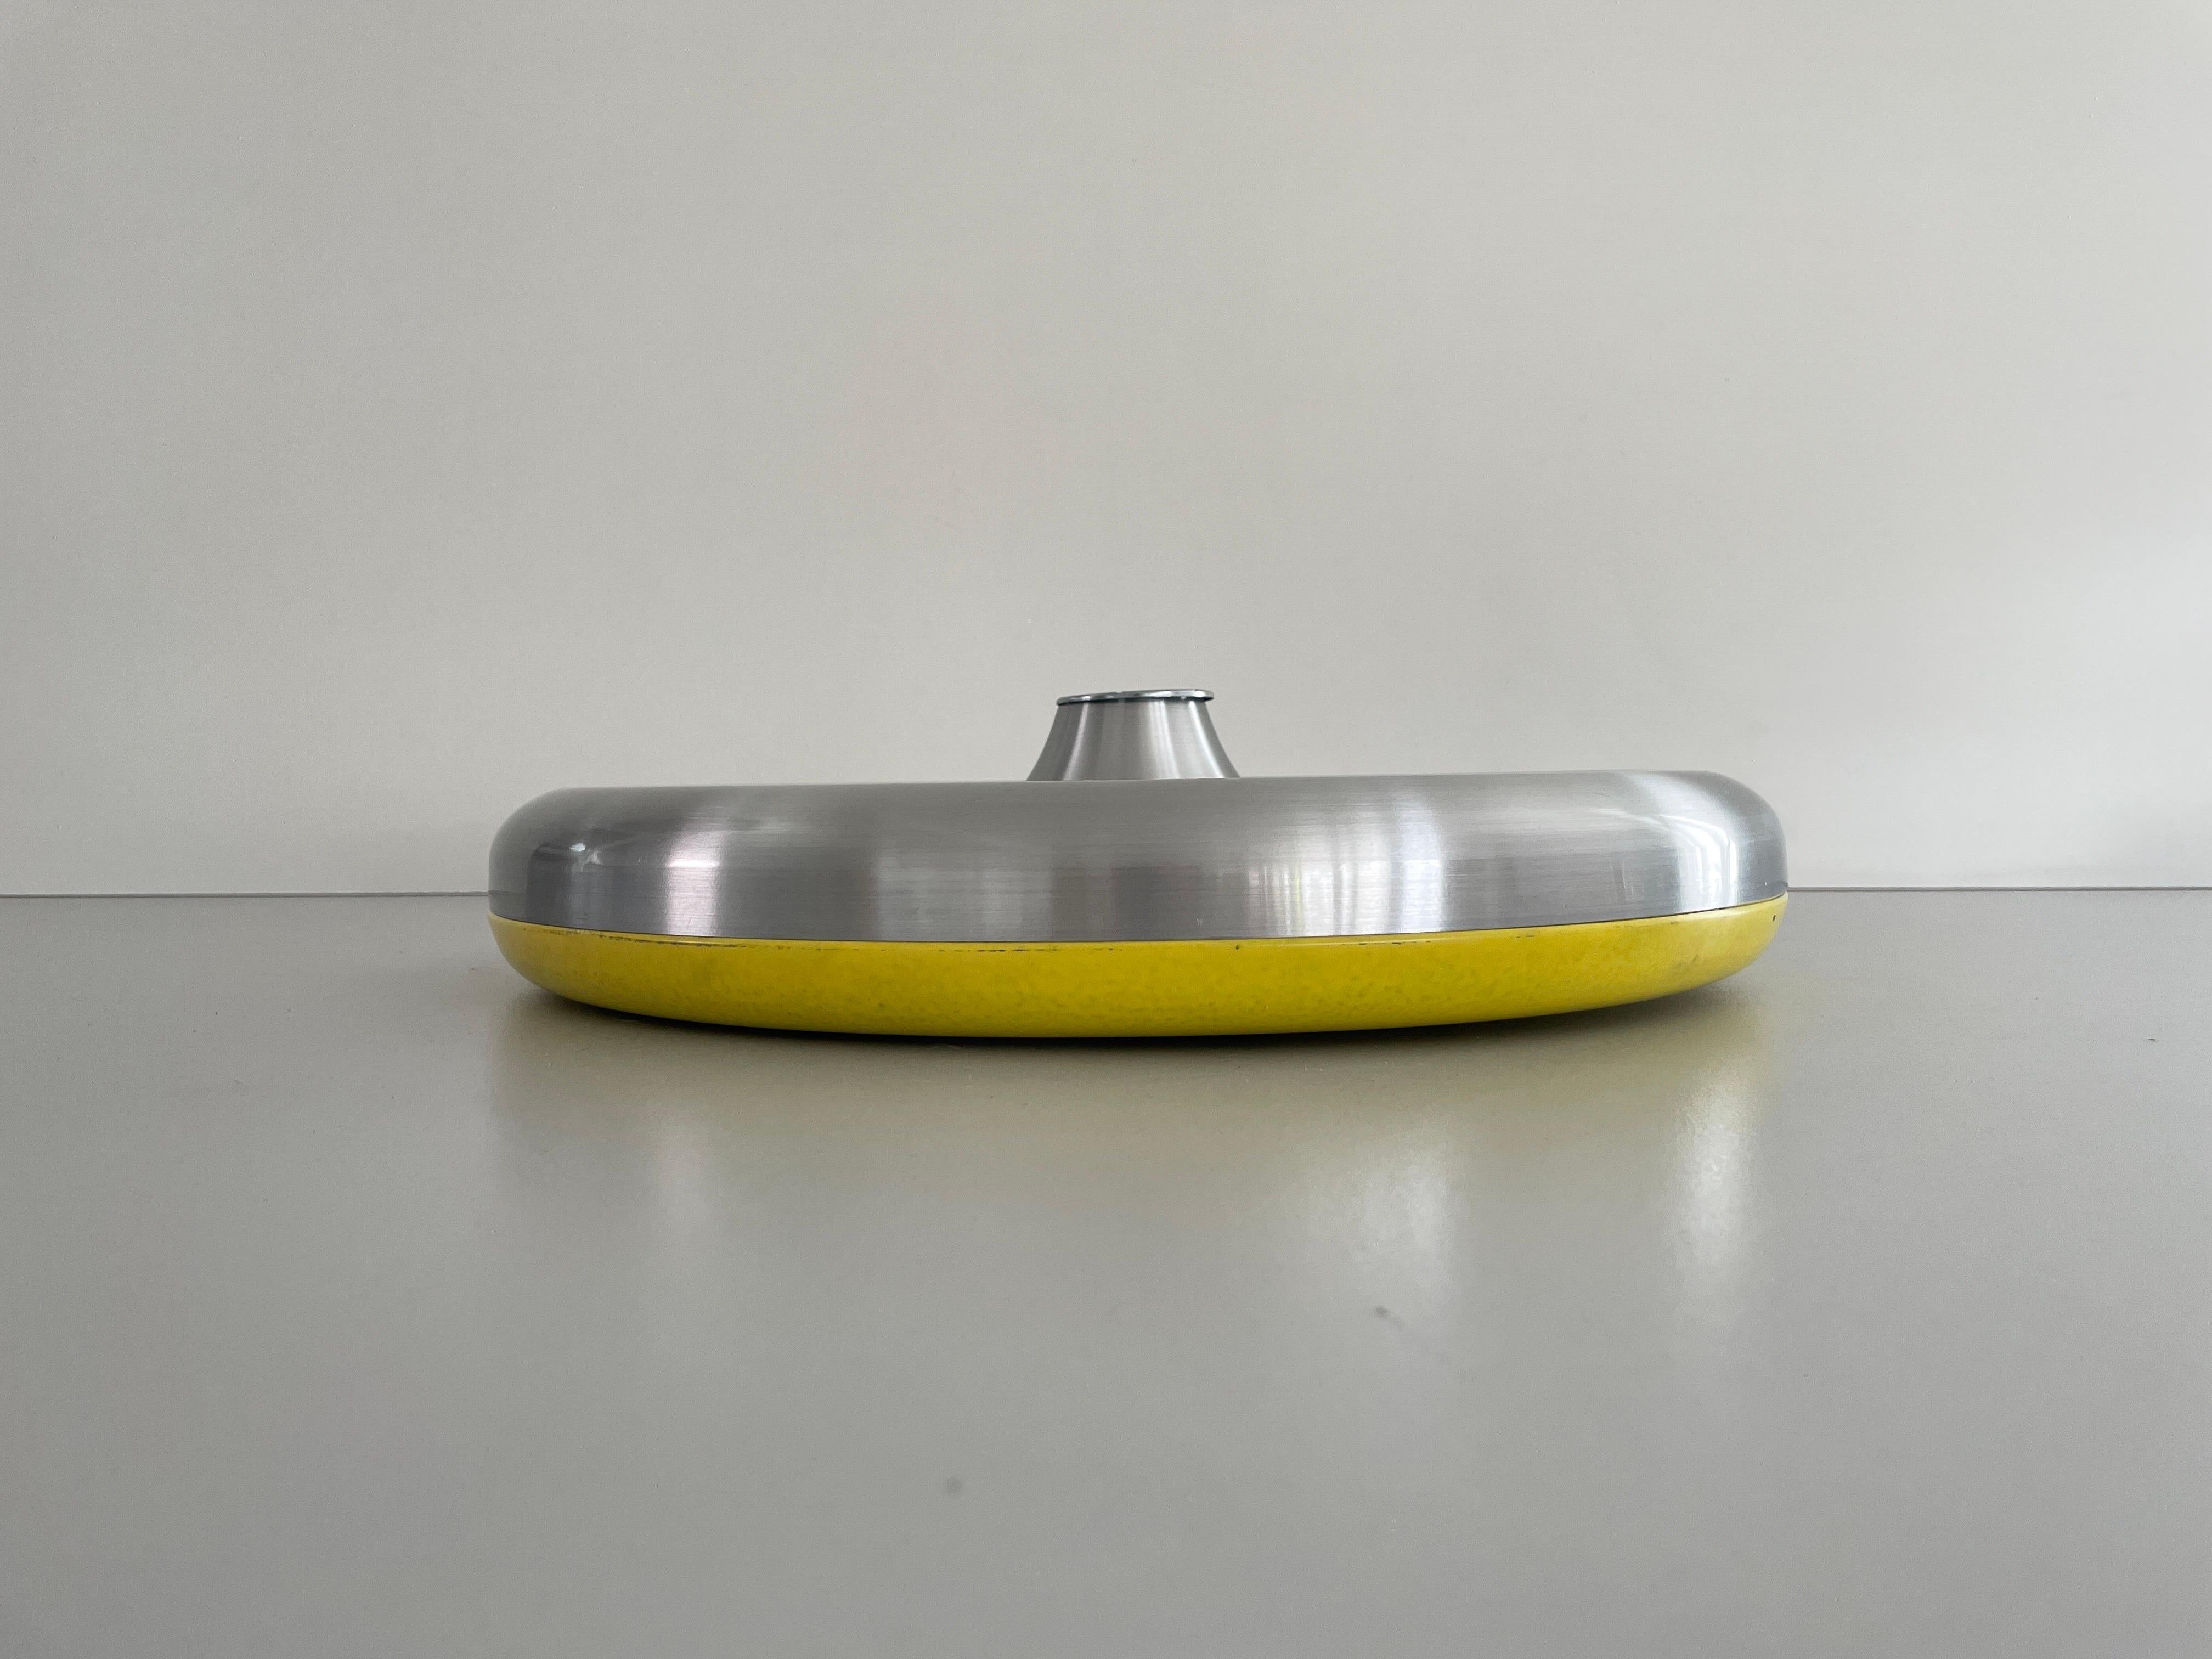 Metallic Grey and Yellow Space Age Flush Mount Ceiling Lamp, 1970s, Germany For Sale 1